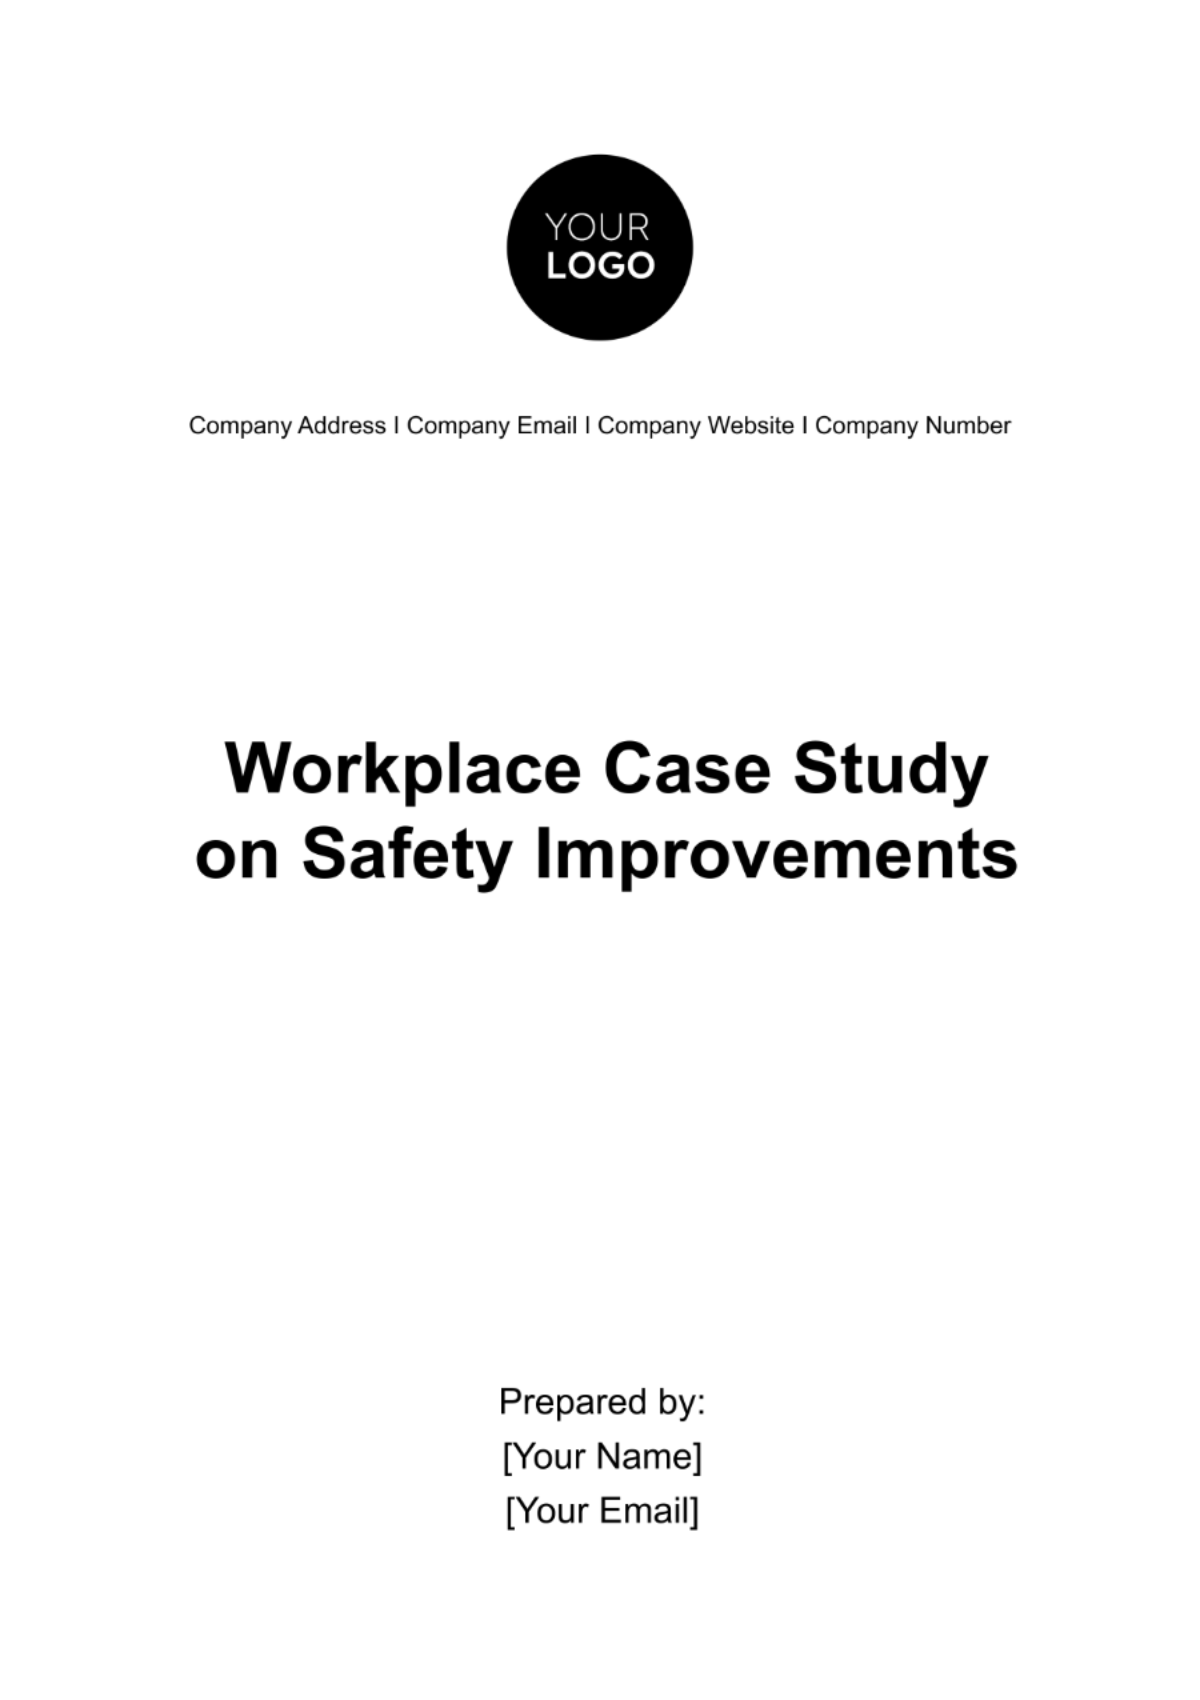 Workplace Case Study on Safety Improvements Template